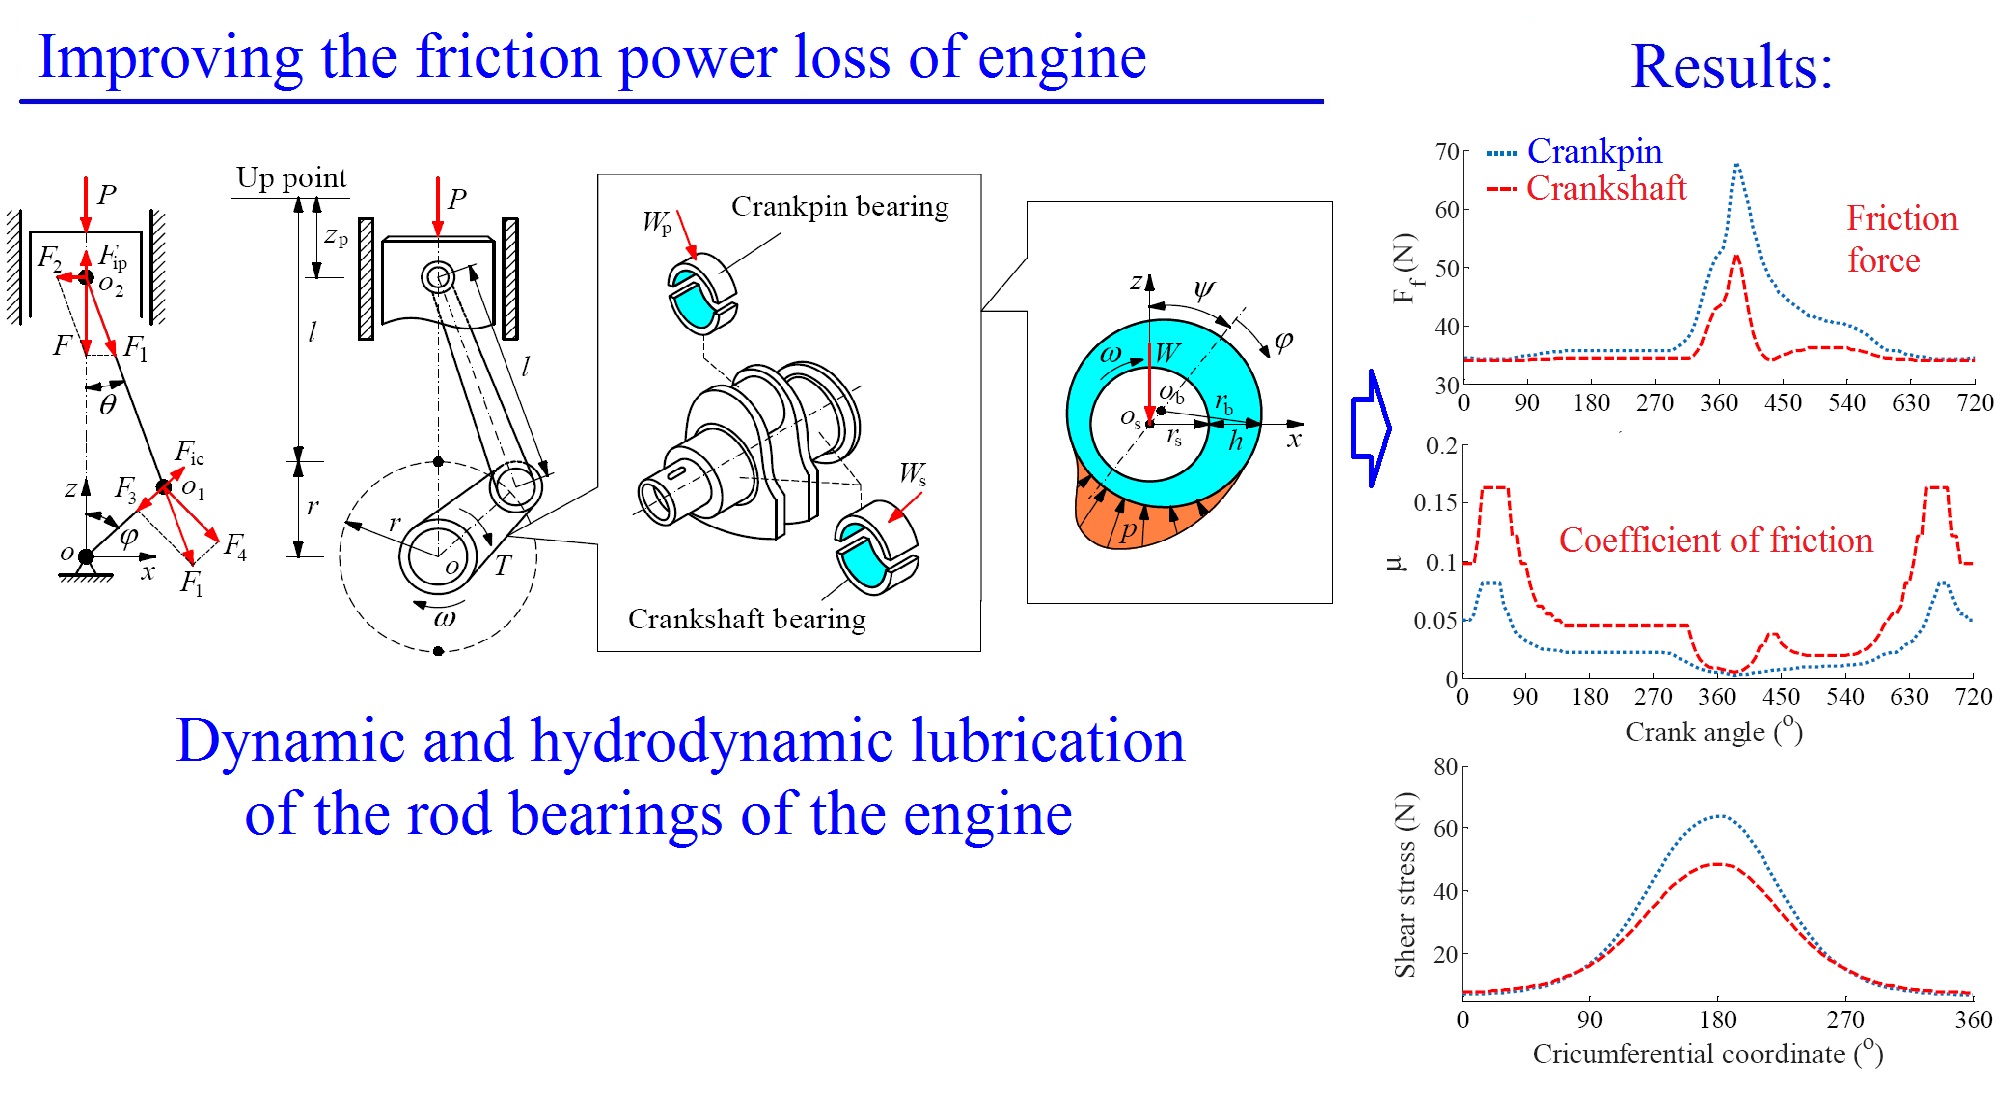 Comparison of friction power loss between crankpin and crankshaft bearings on improving the engine power